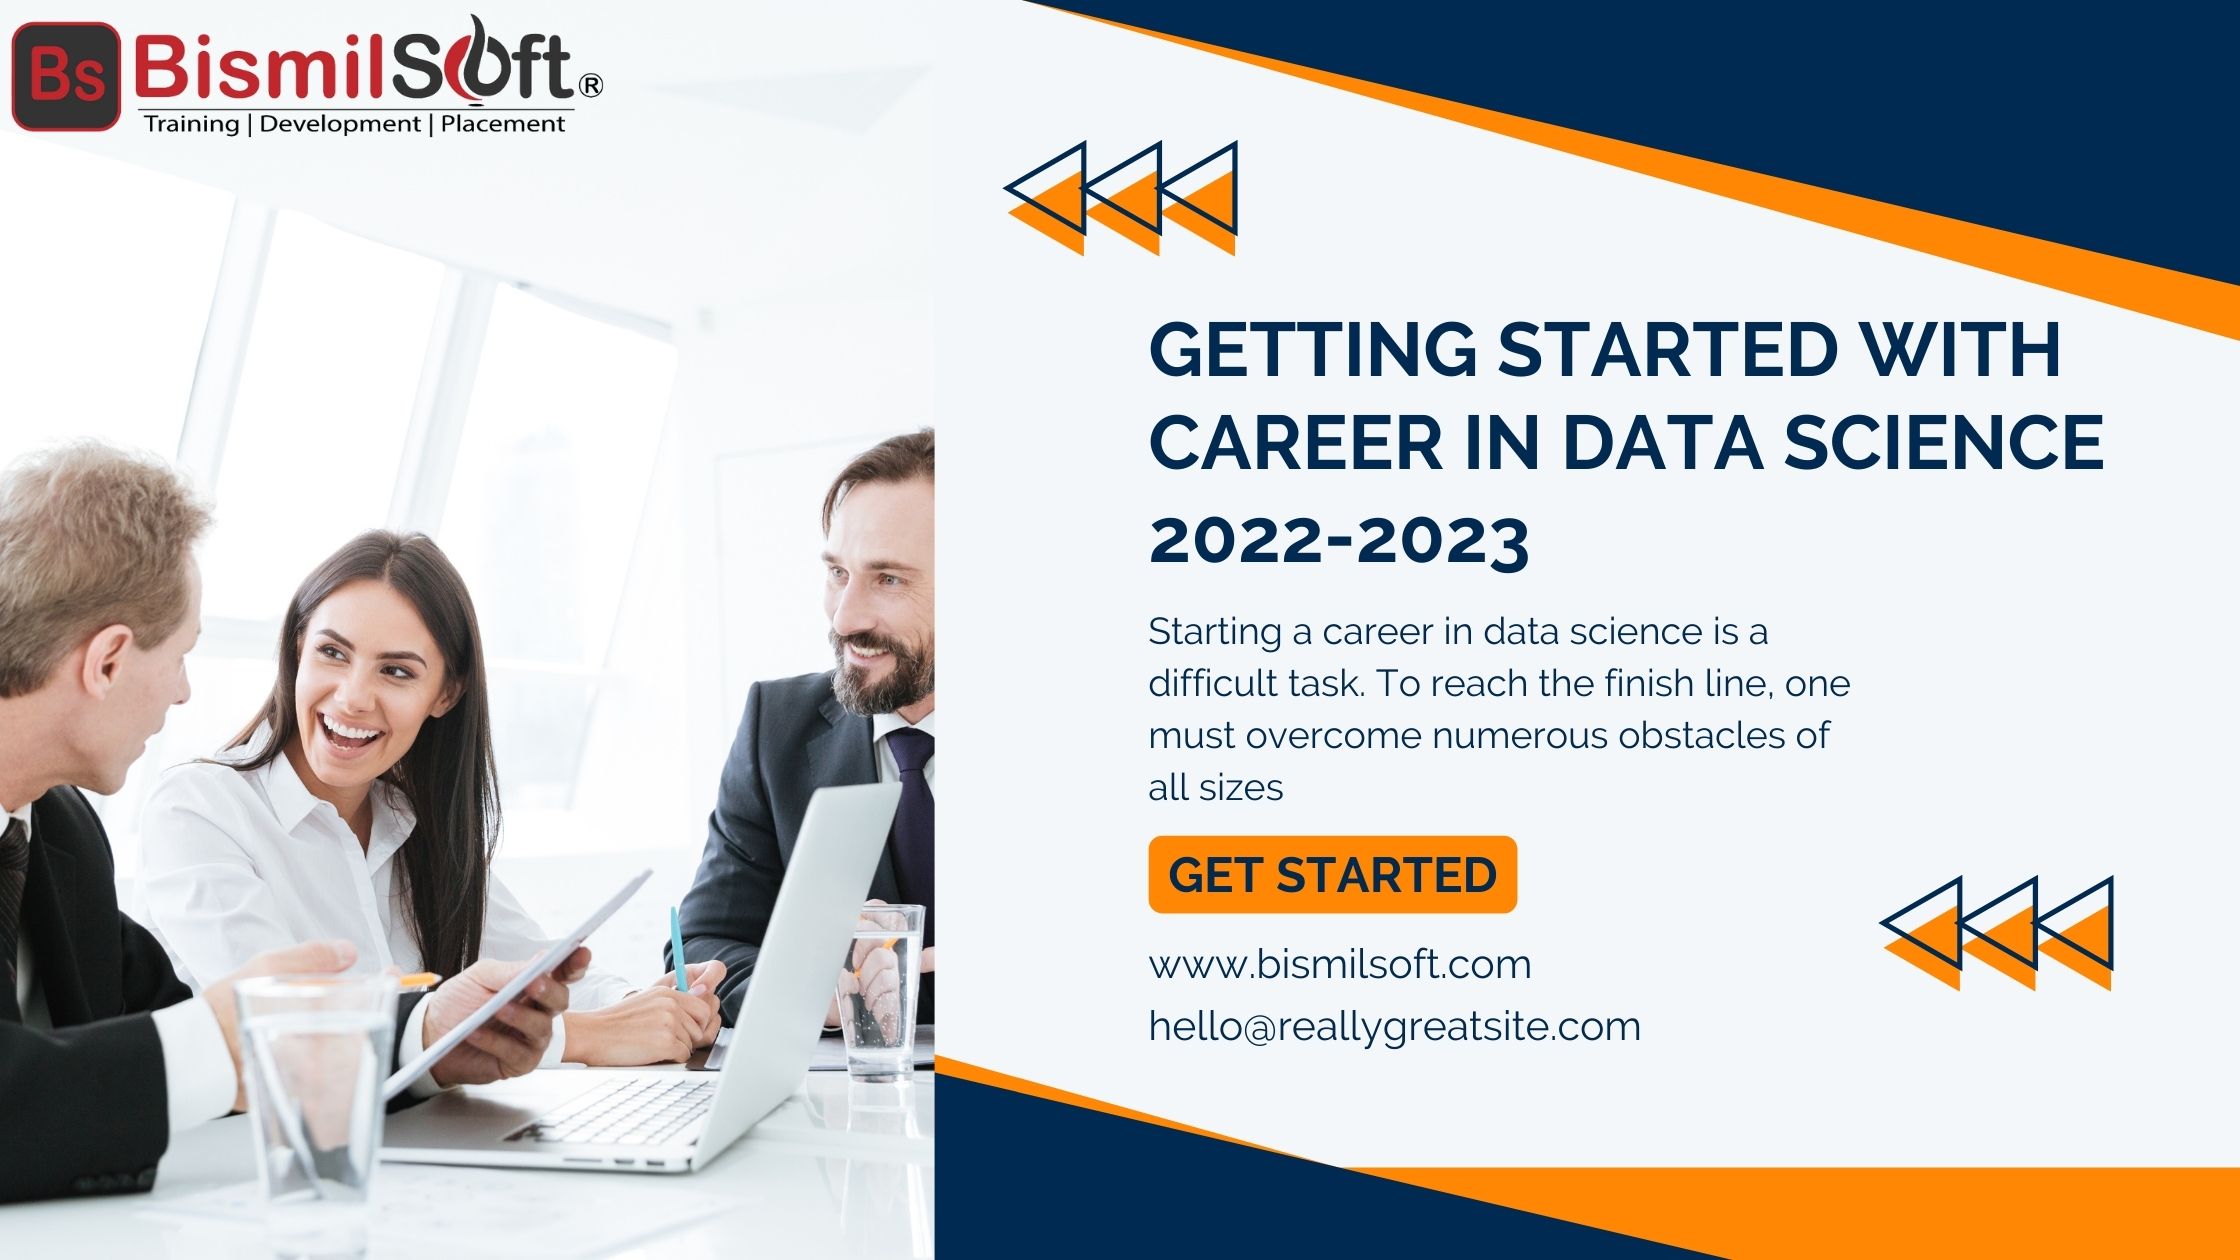 Getting Started With Career in Data Science 2022-2023